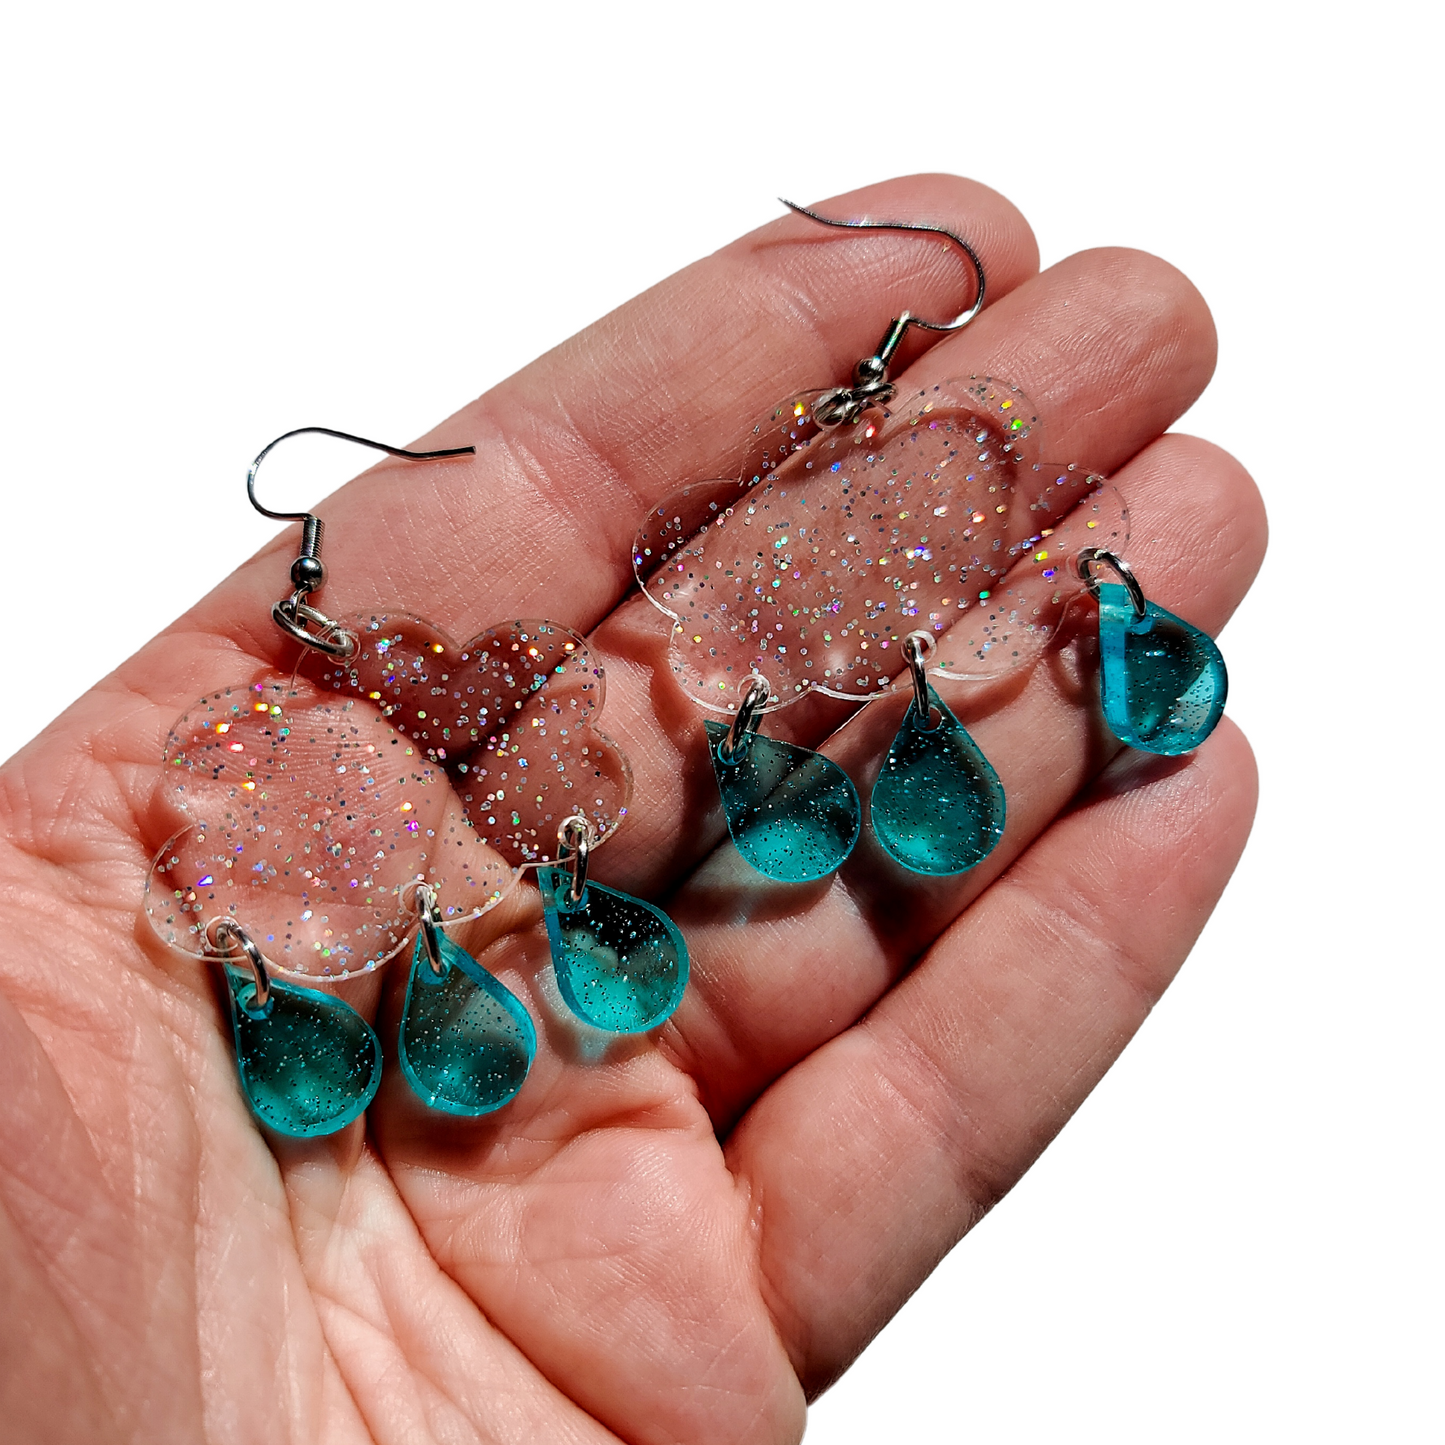 Jelly Glitter Clouds with Raindrops - Earrings - Laser Cut